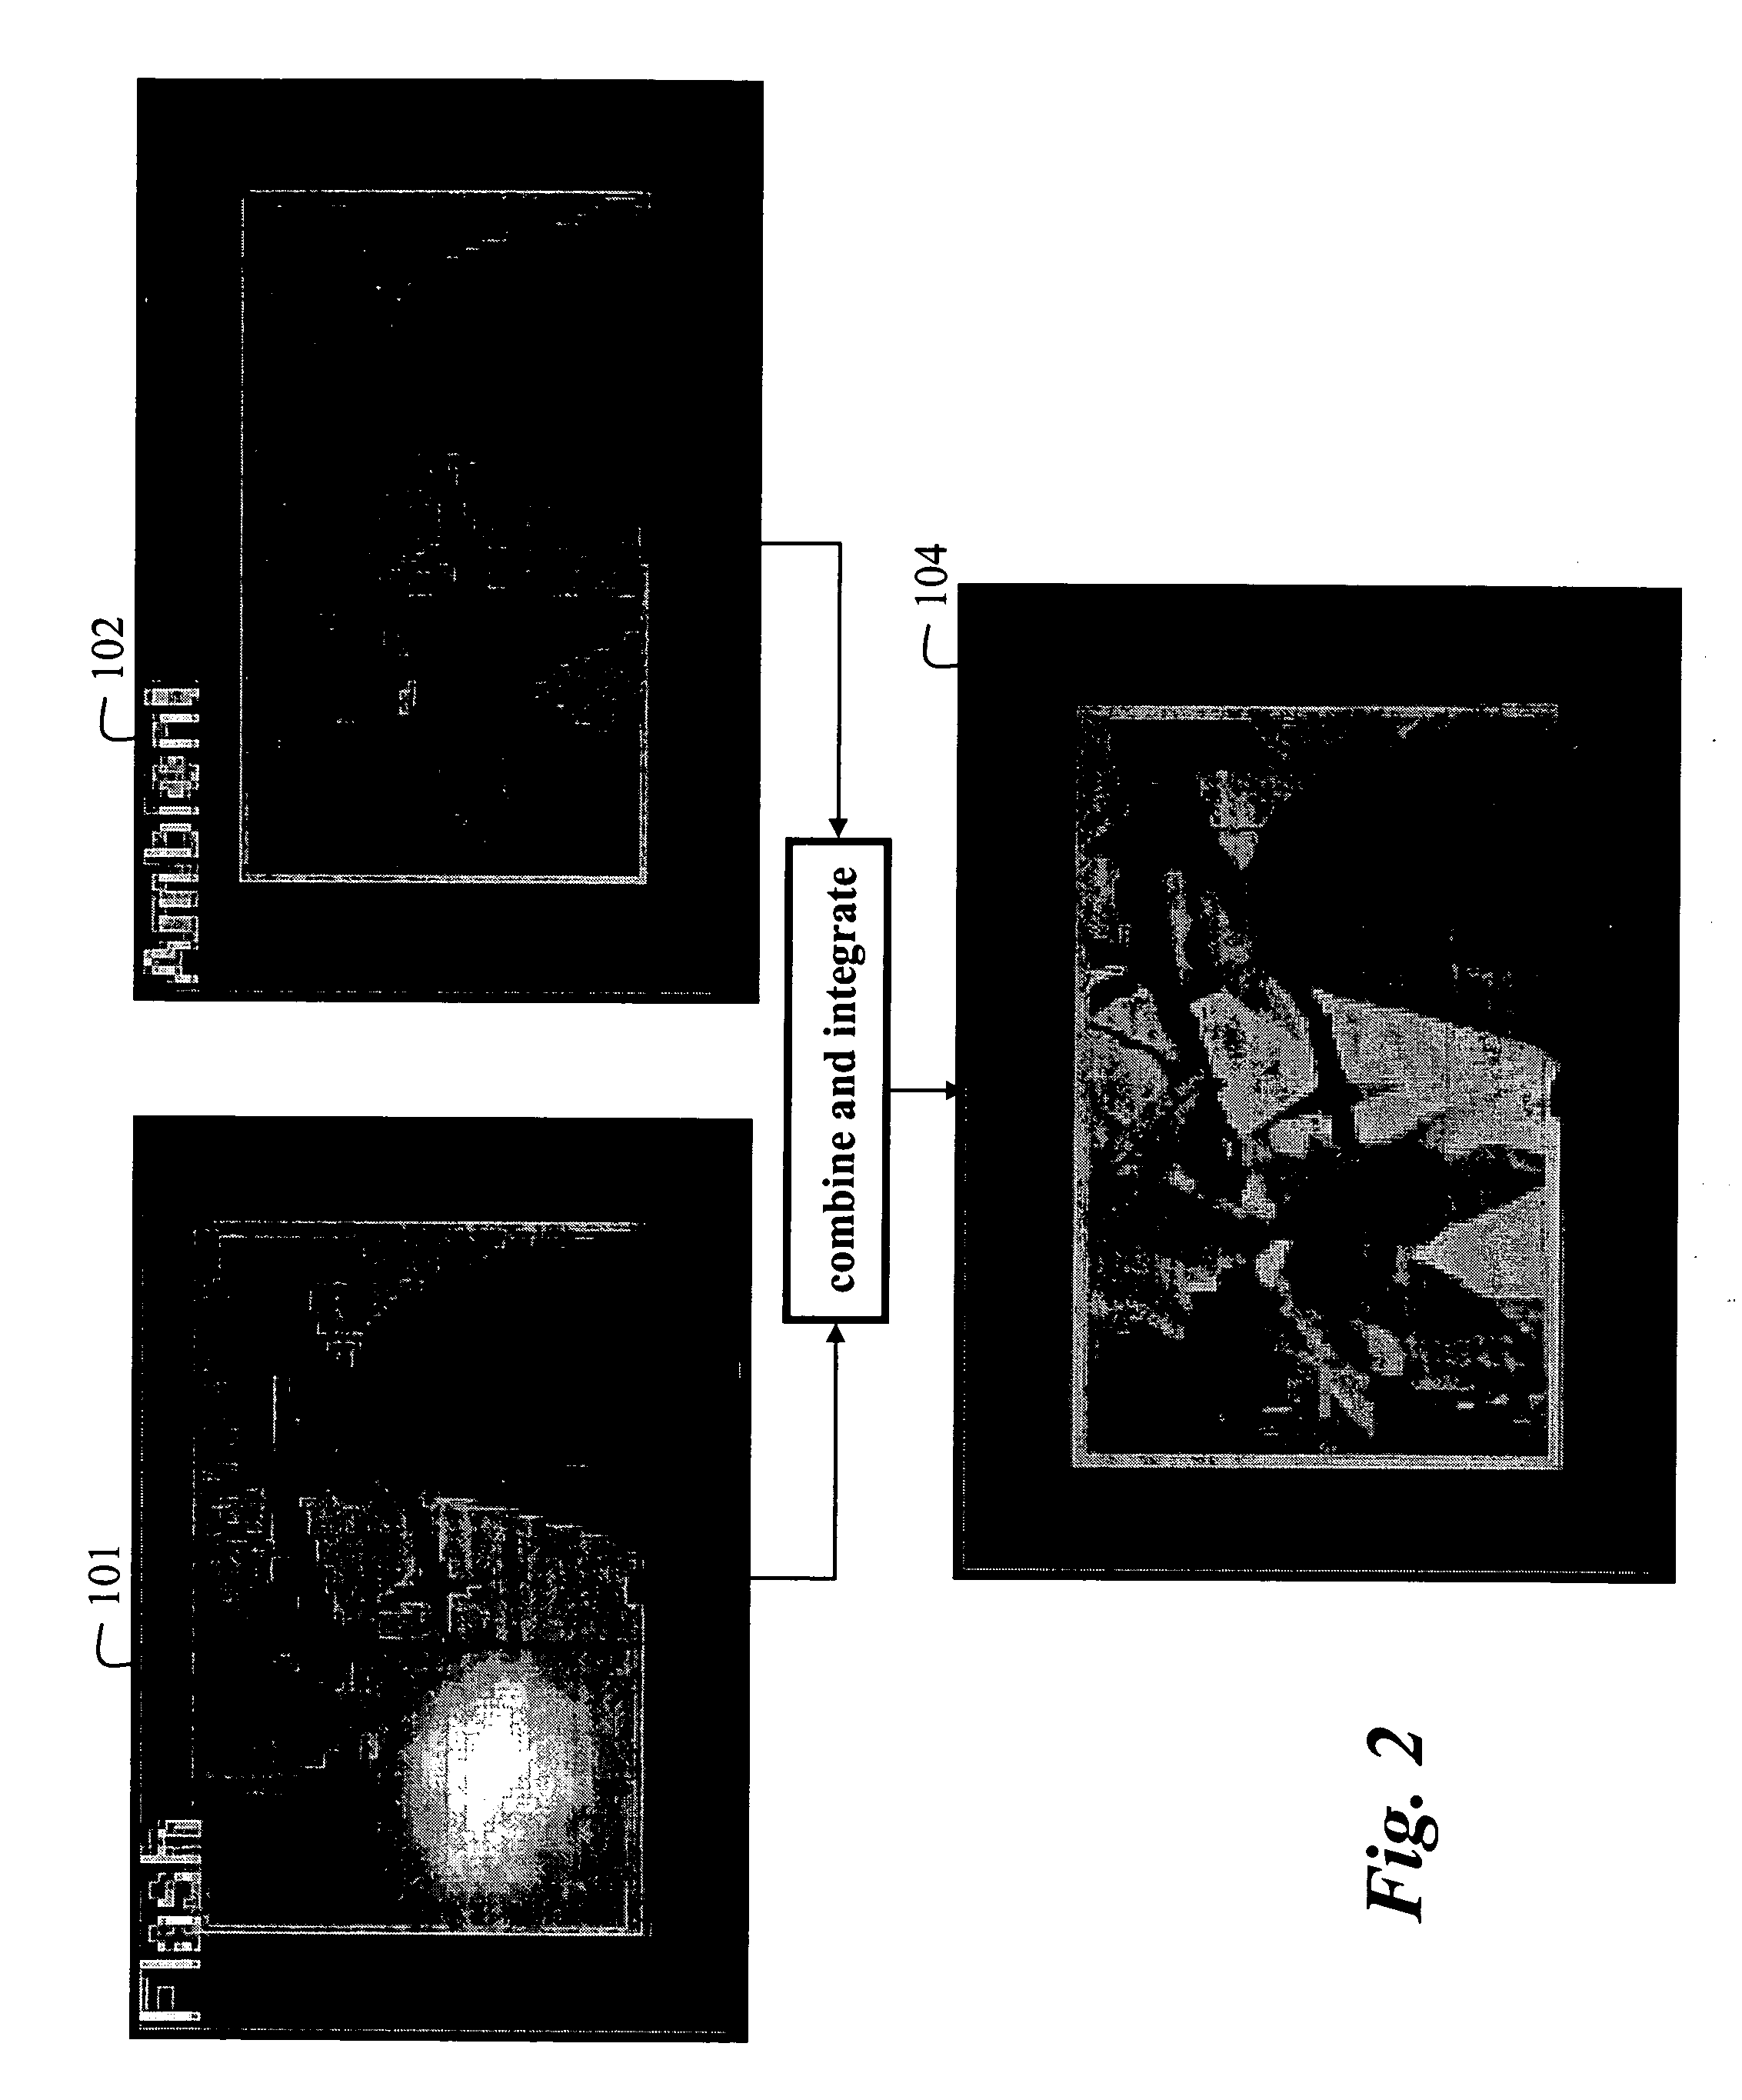 Method and apparatus for acquiring HDR flash images